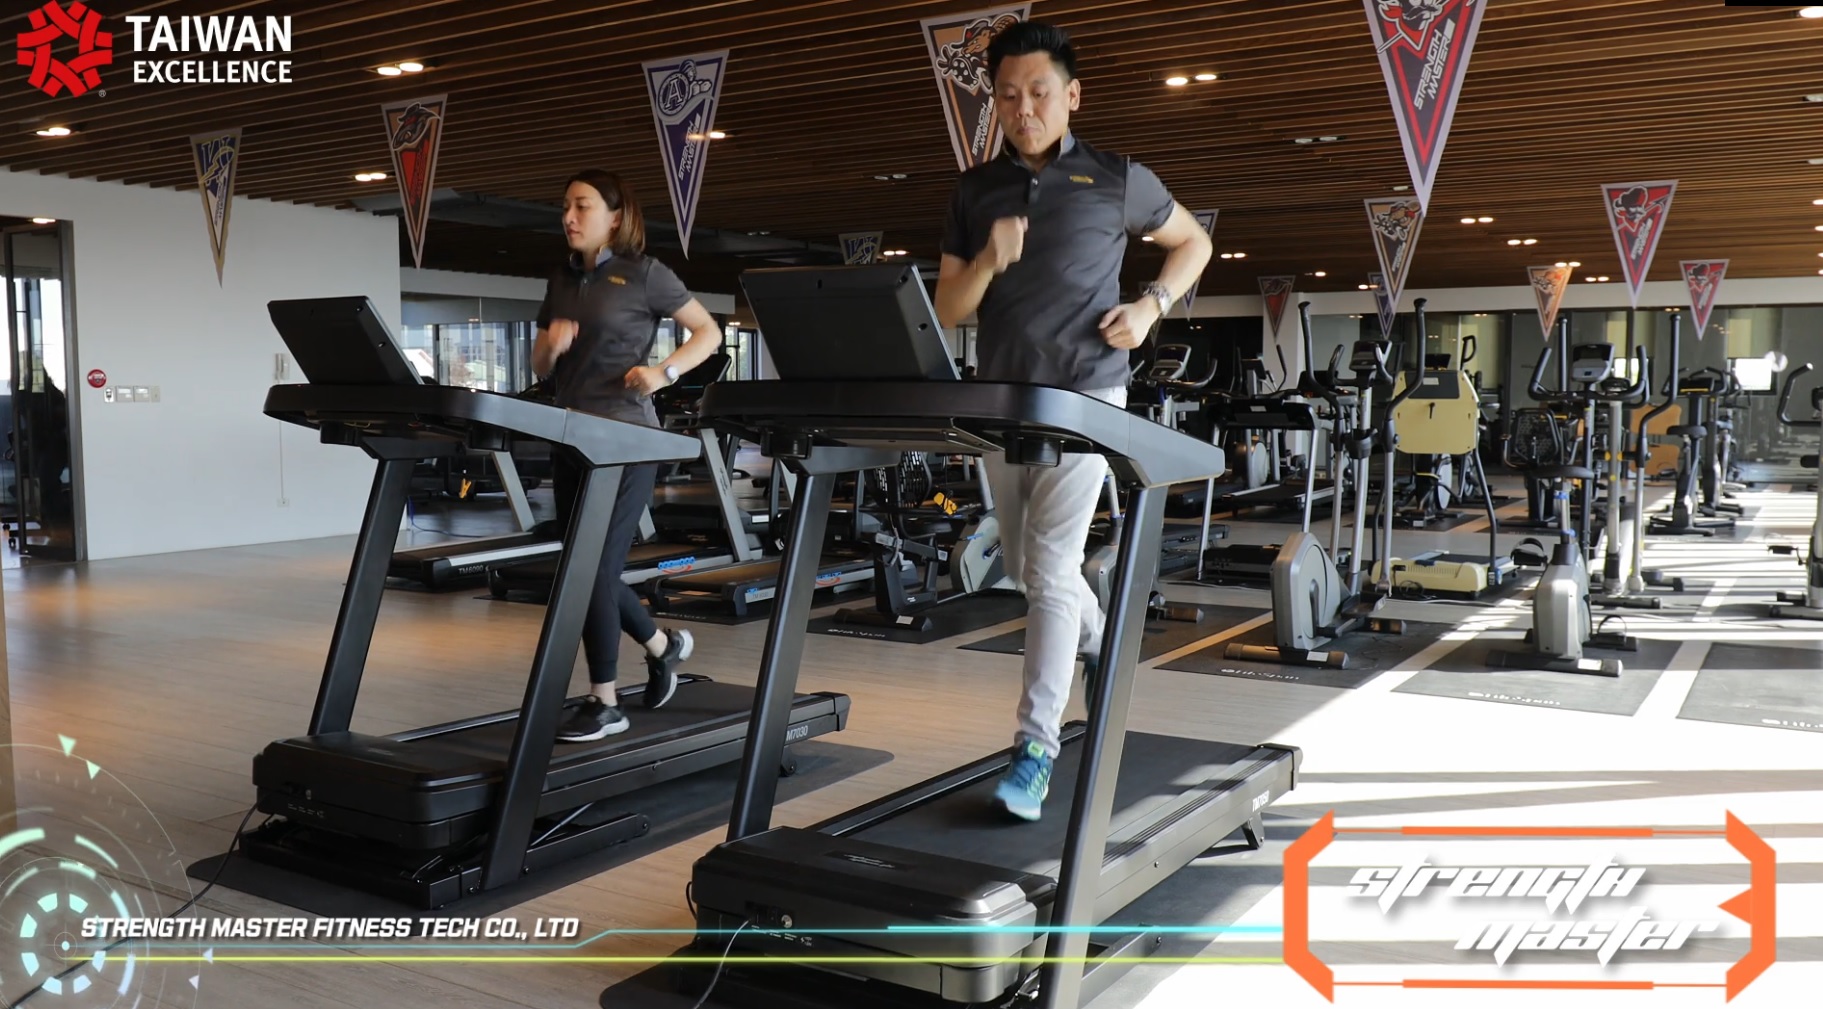 Taiwan Excellence Smart Fitness Online Product Launch